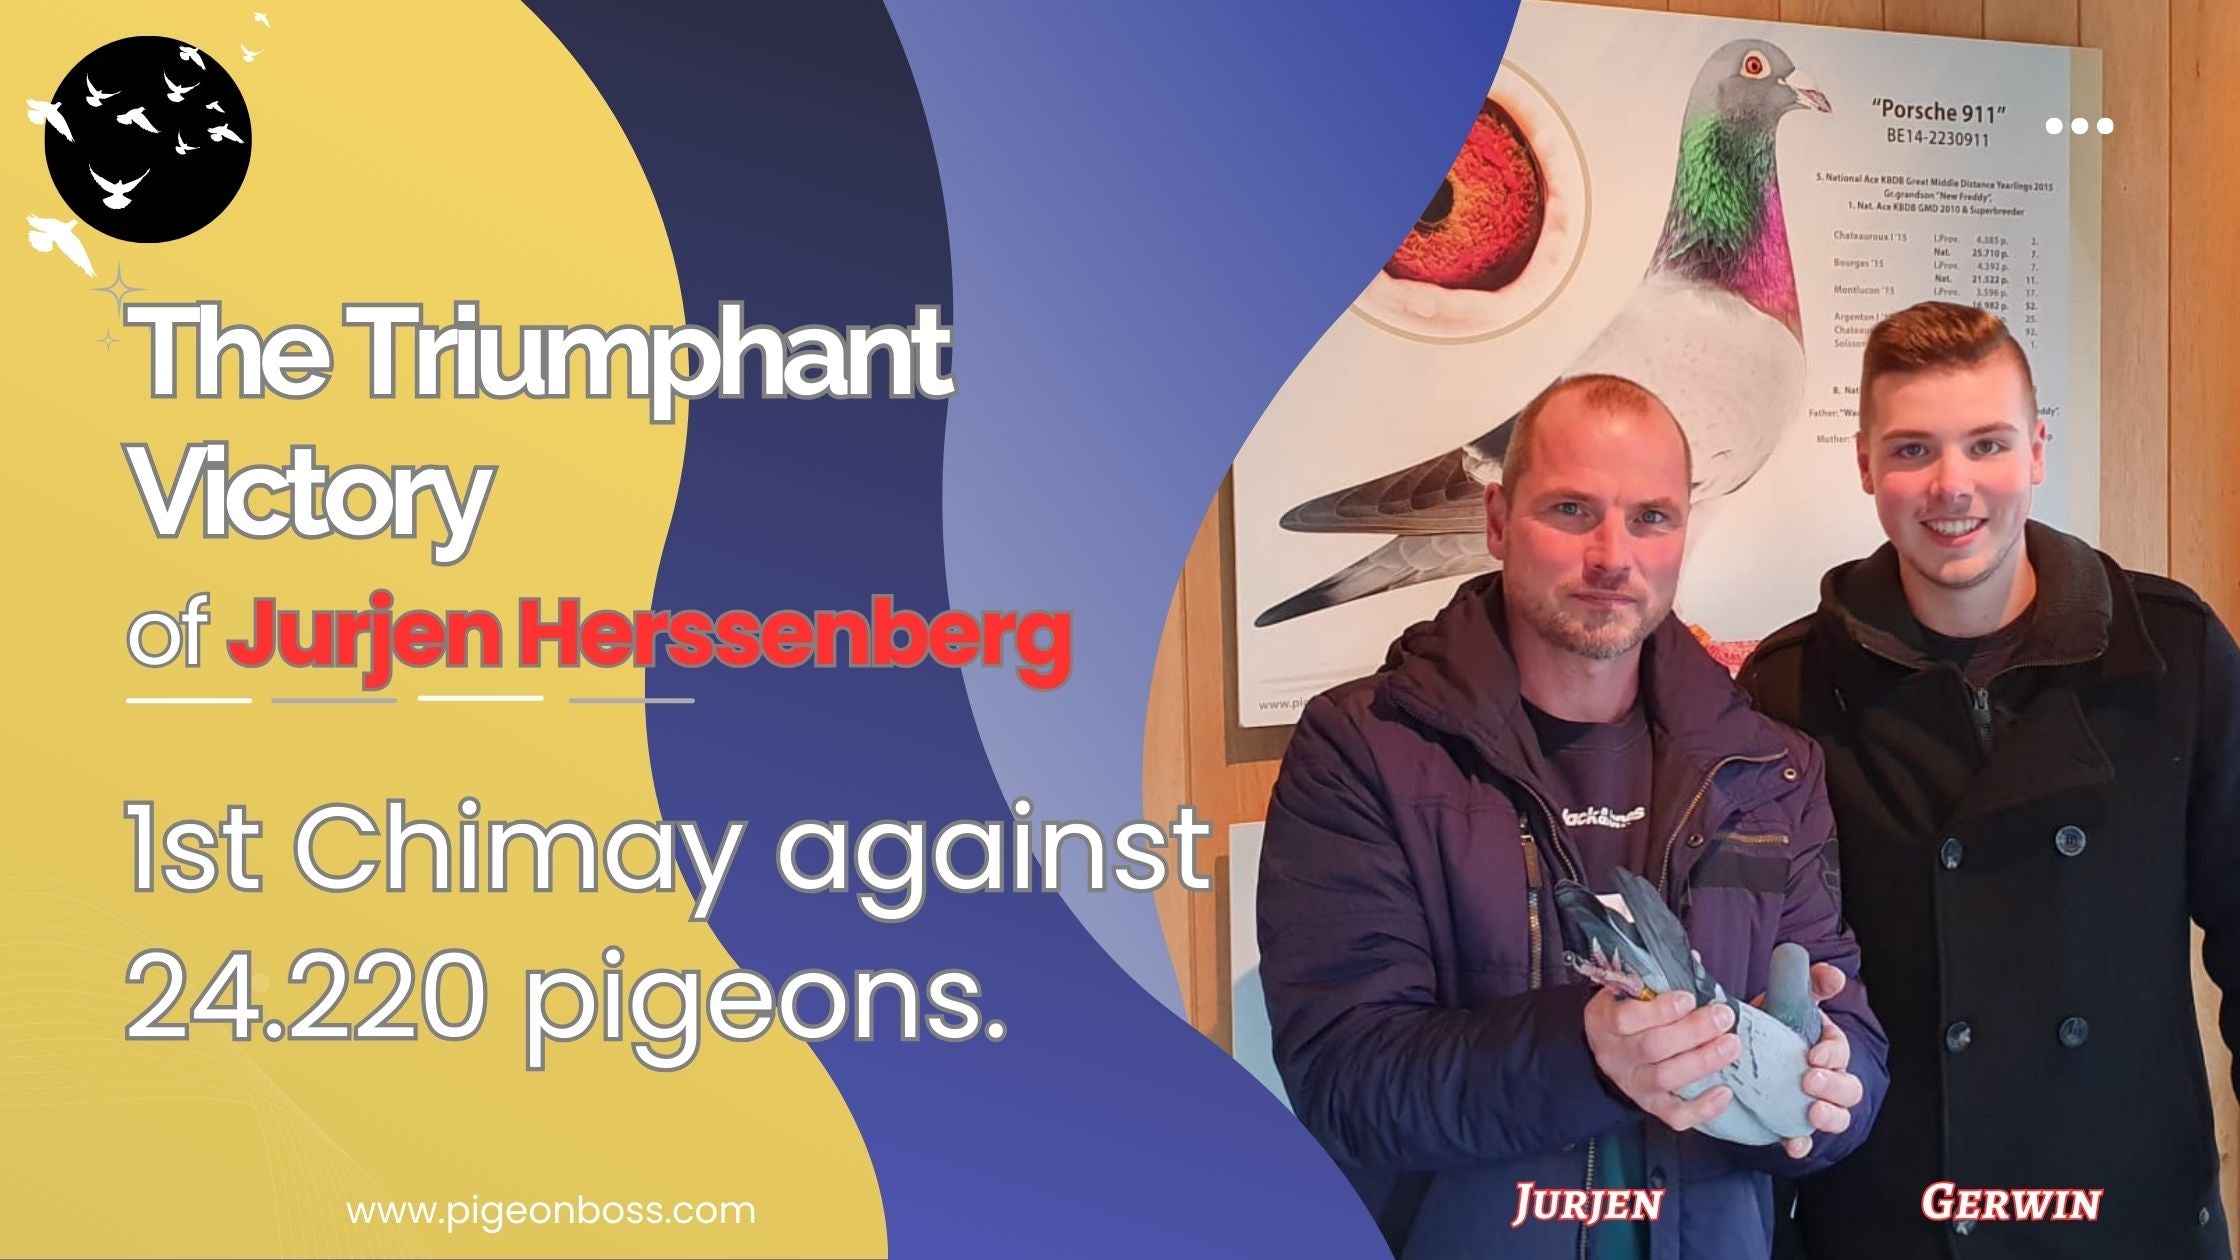 The Triumphant Victory of Jurjen Herssenberg from Chimay: A New Chapter in Pigeon Racing